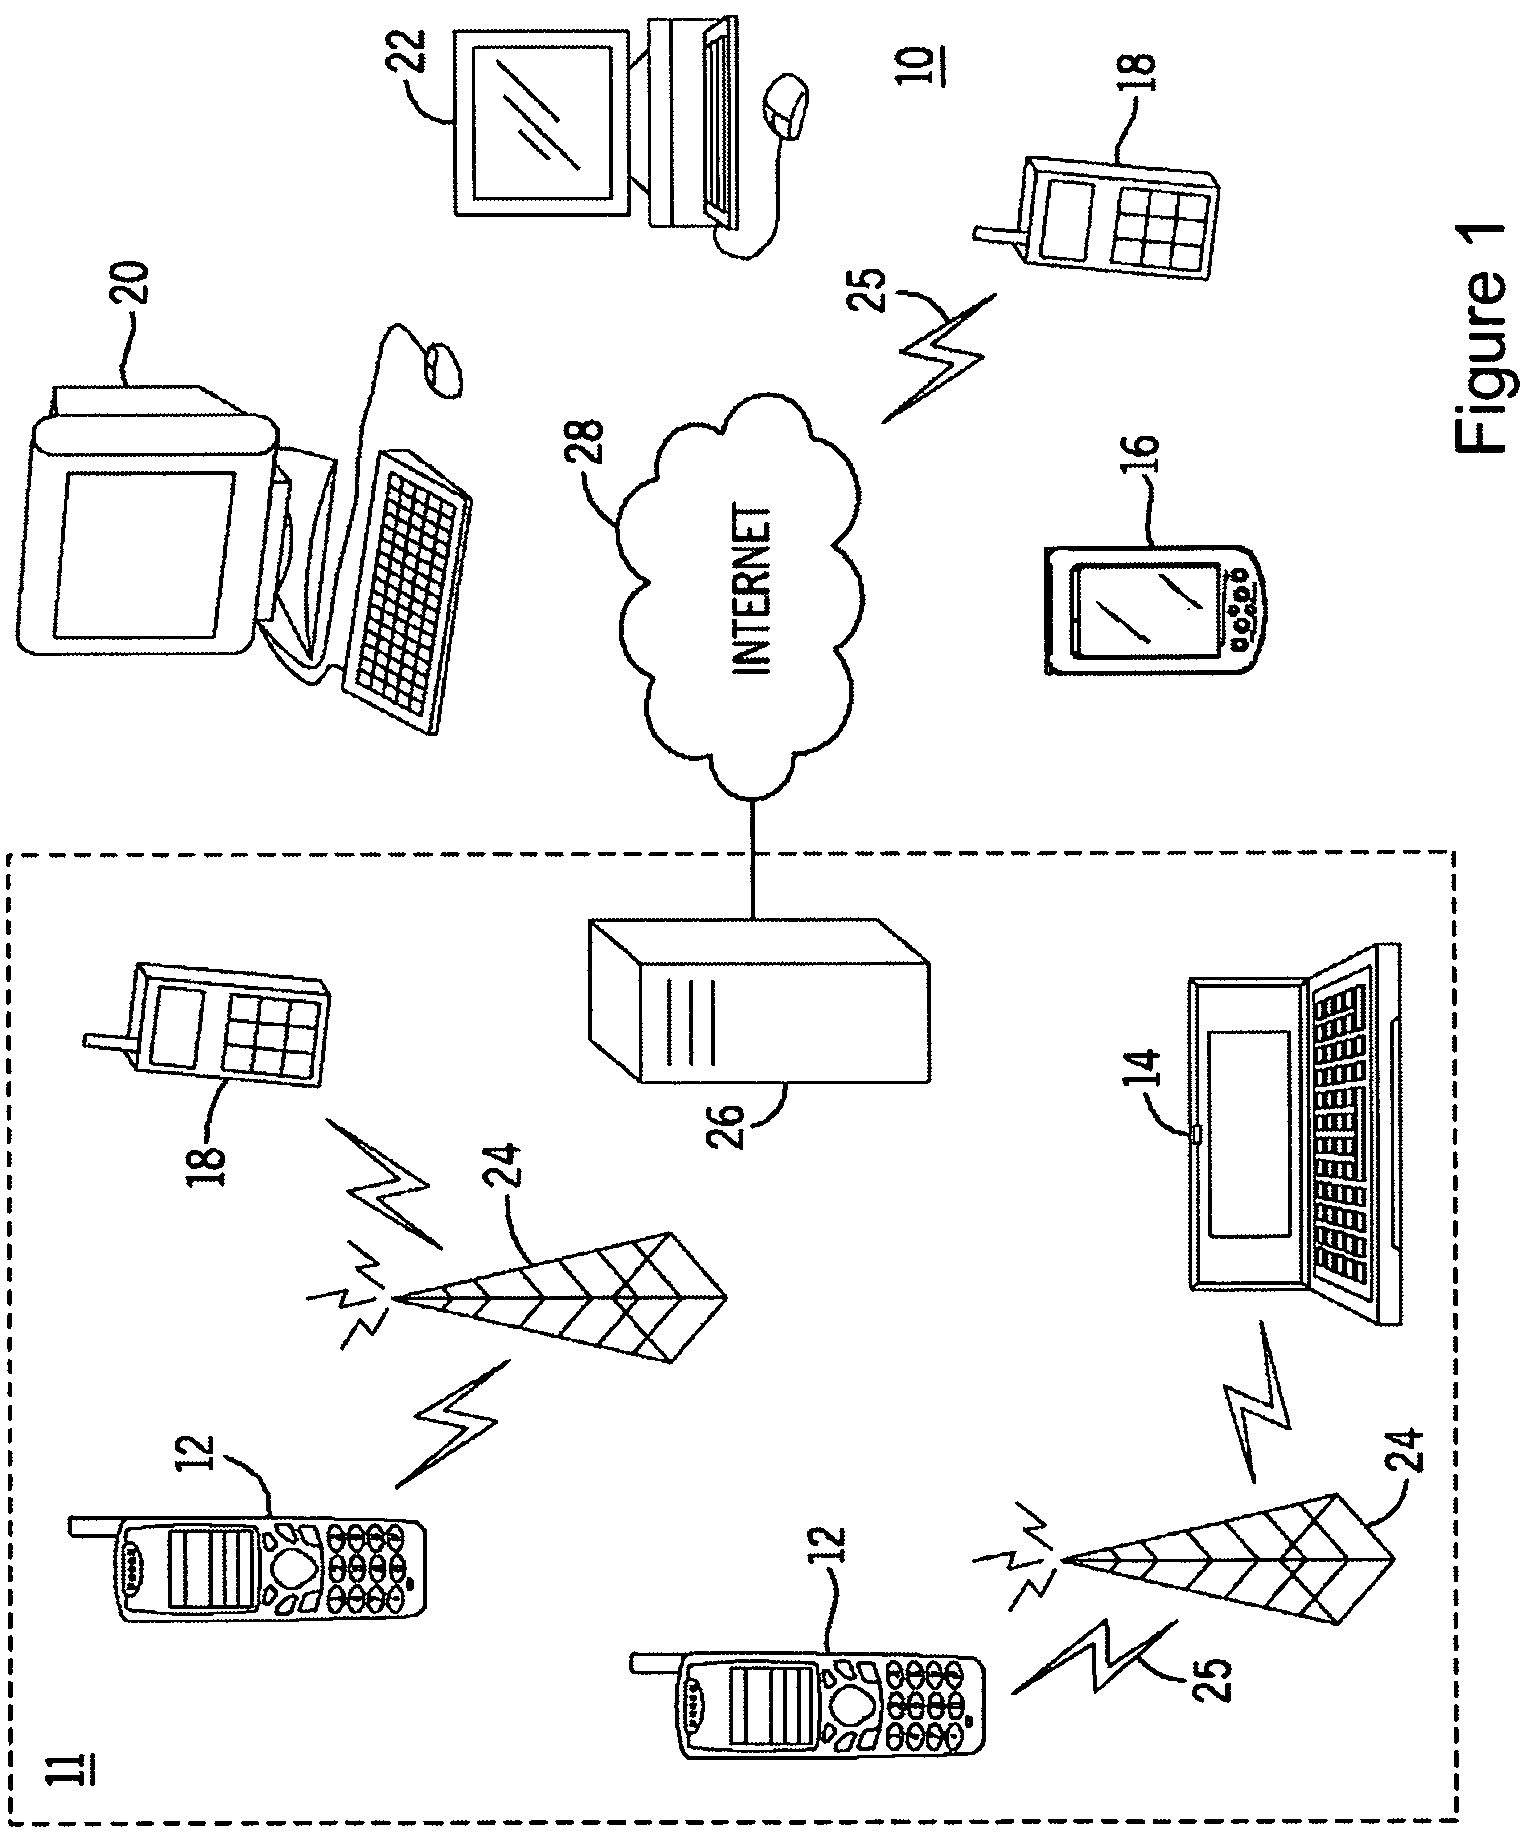 Method providing positioning and navigation inside large buildings